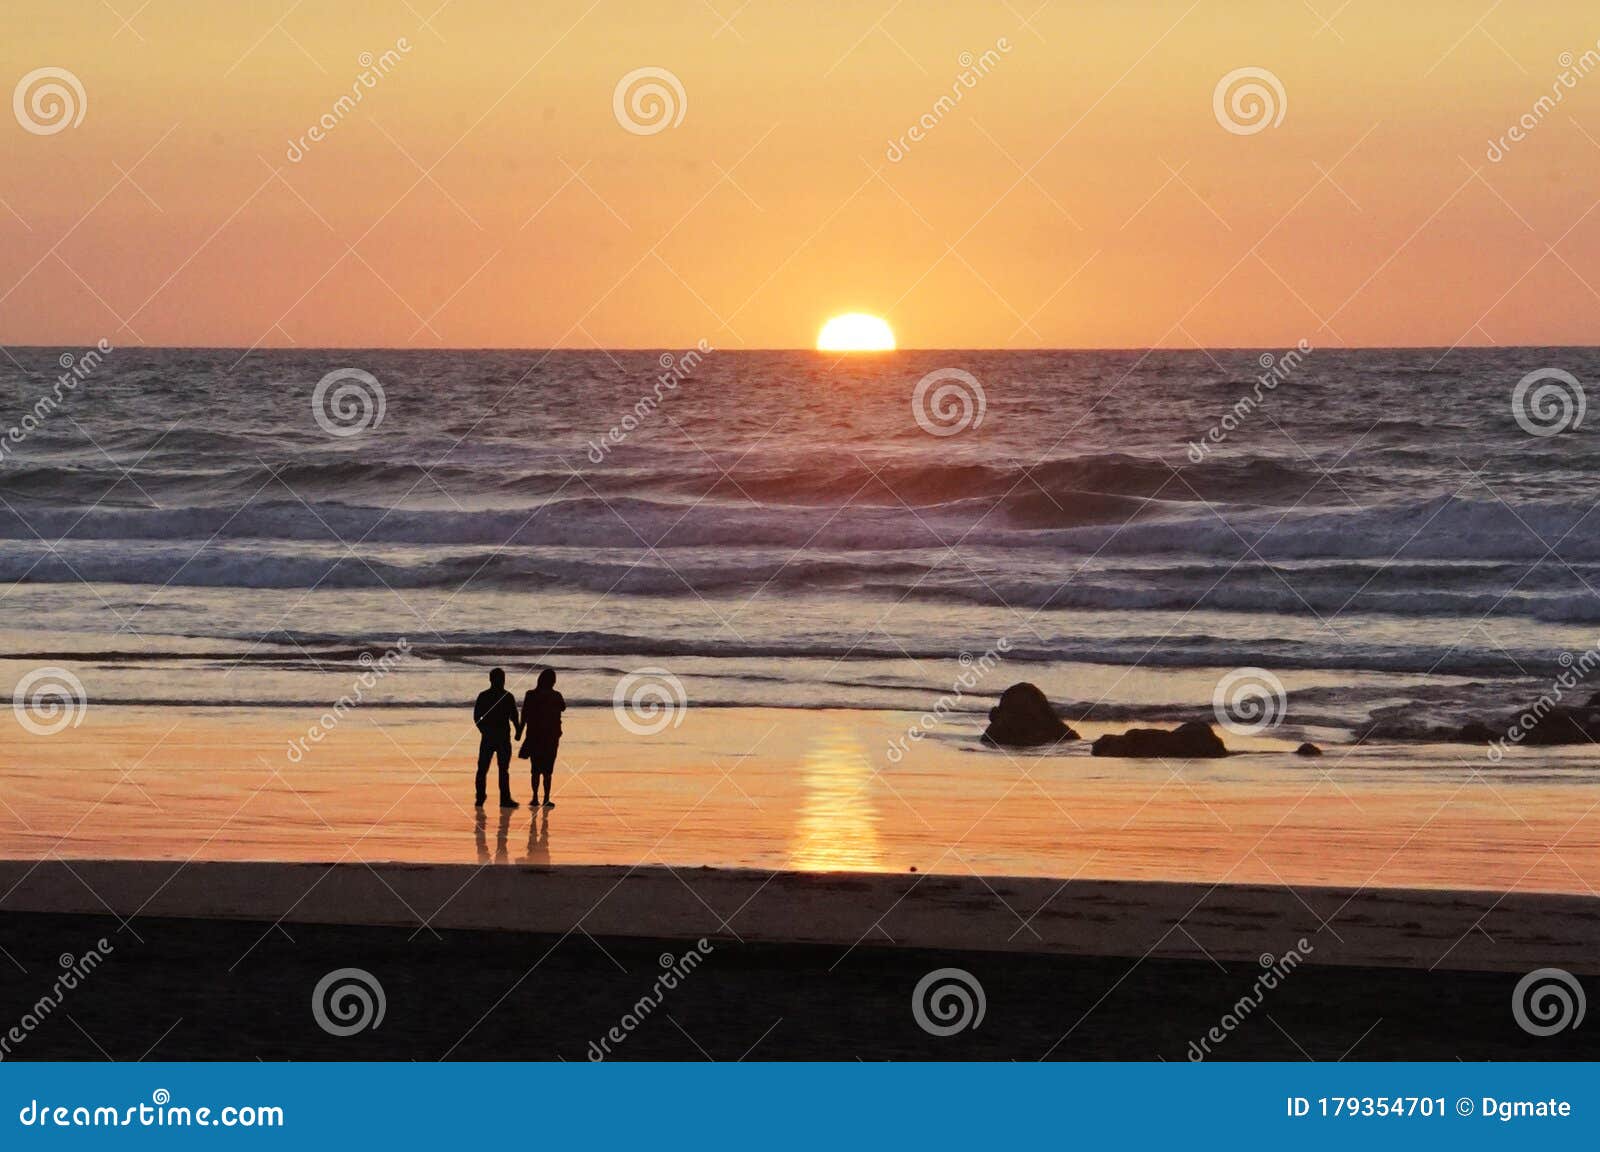 Loving Couple in the Beach Watching Sunset Stock Image - Image of shore ...